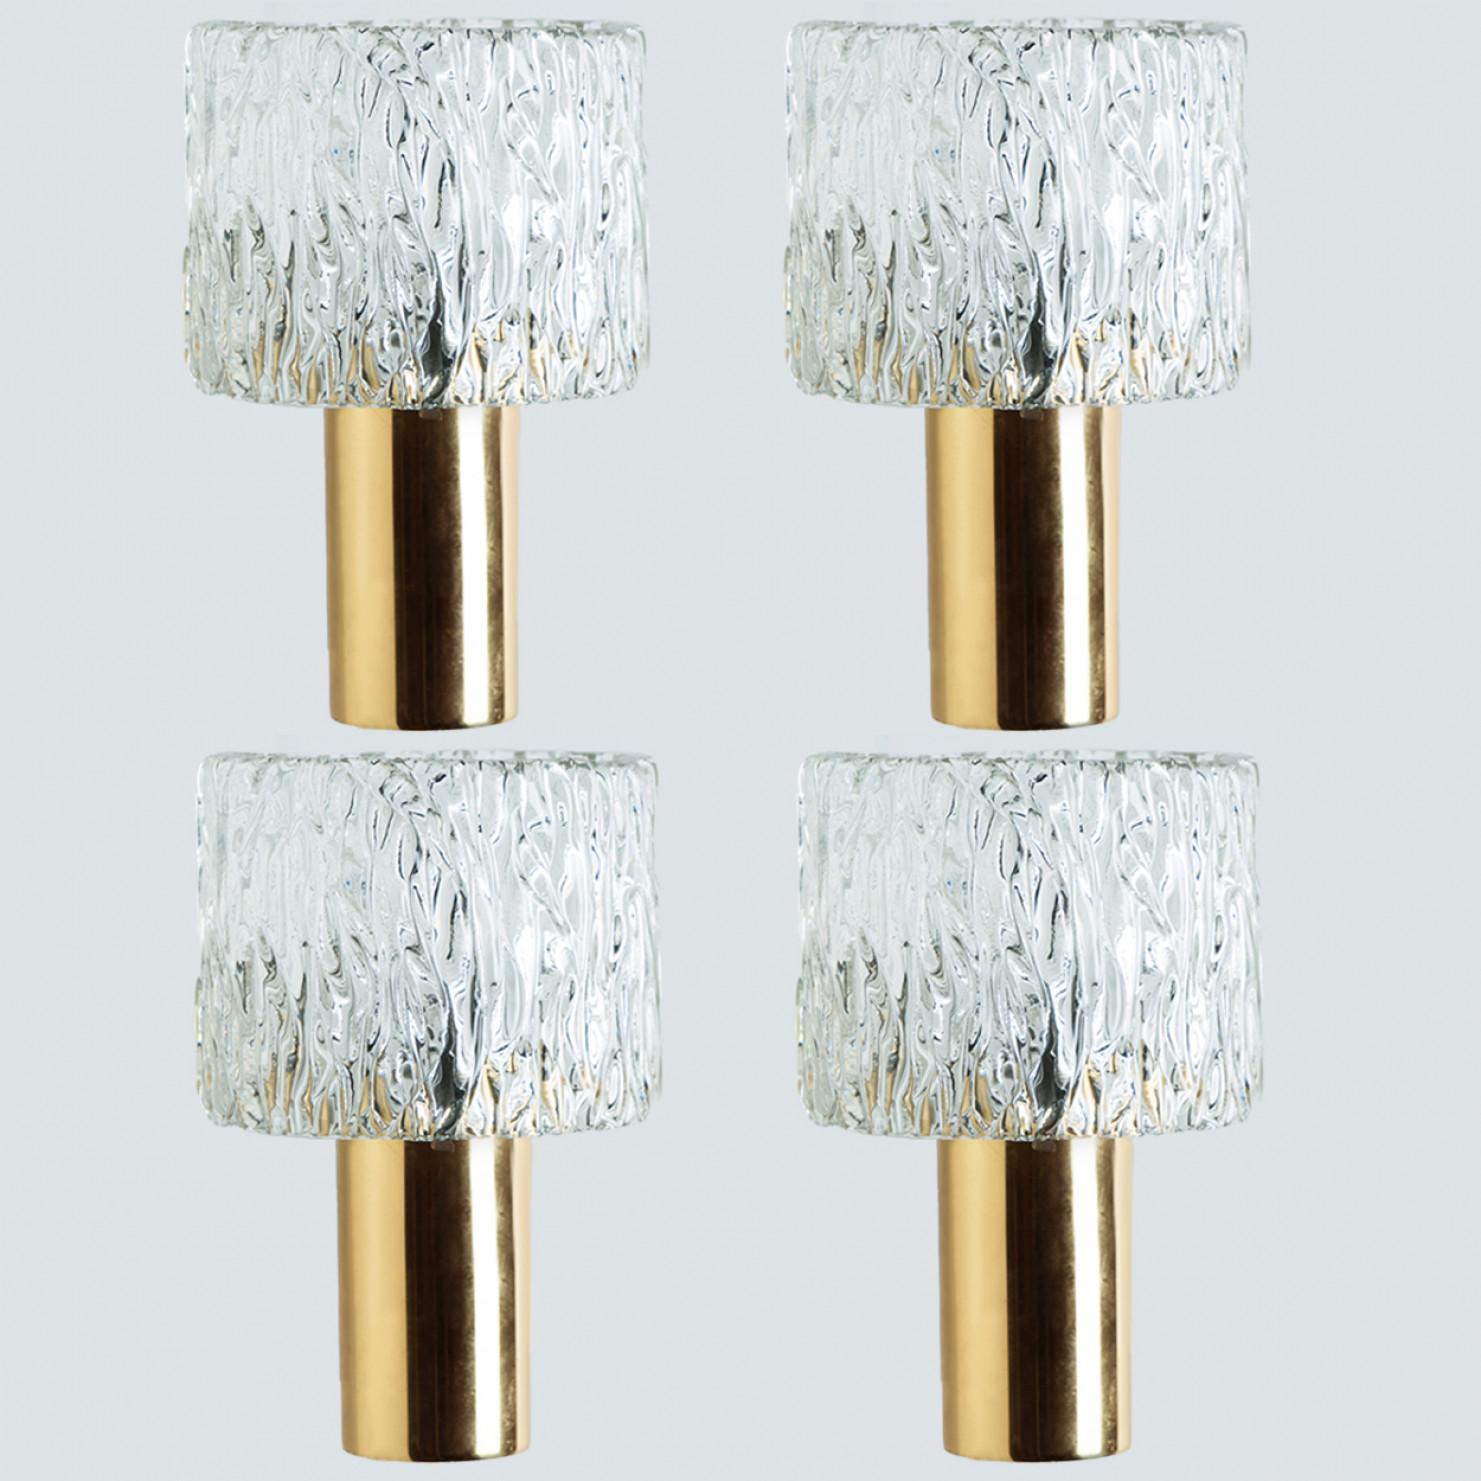 1 of the 2 Pairs of Glass Torch Wall Sconces by Fagerlund, 1960 For Sale 6